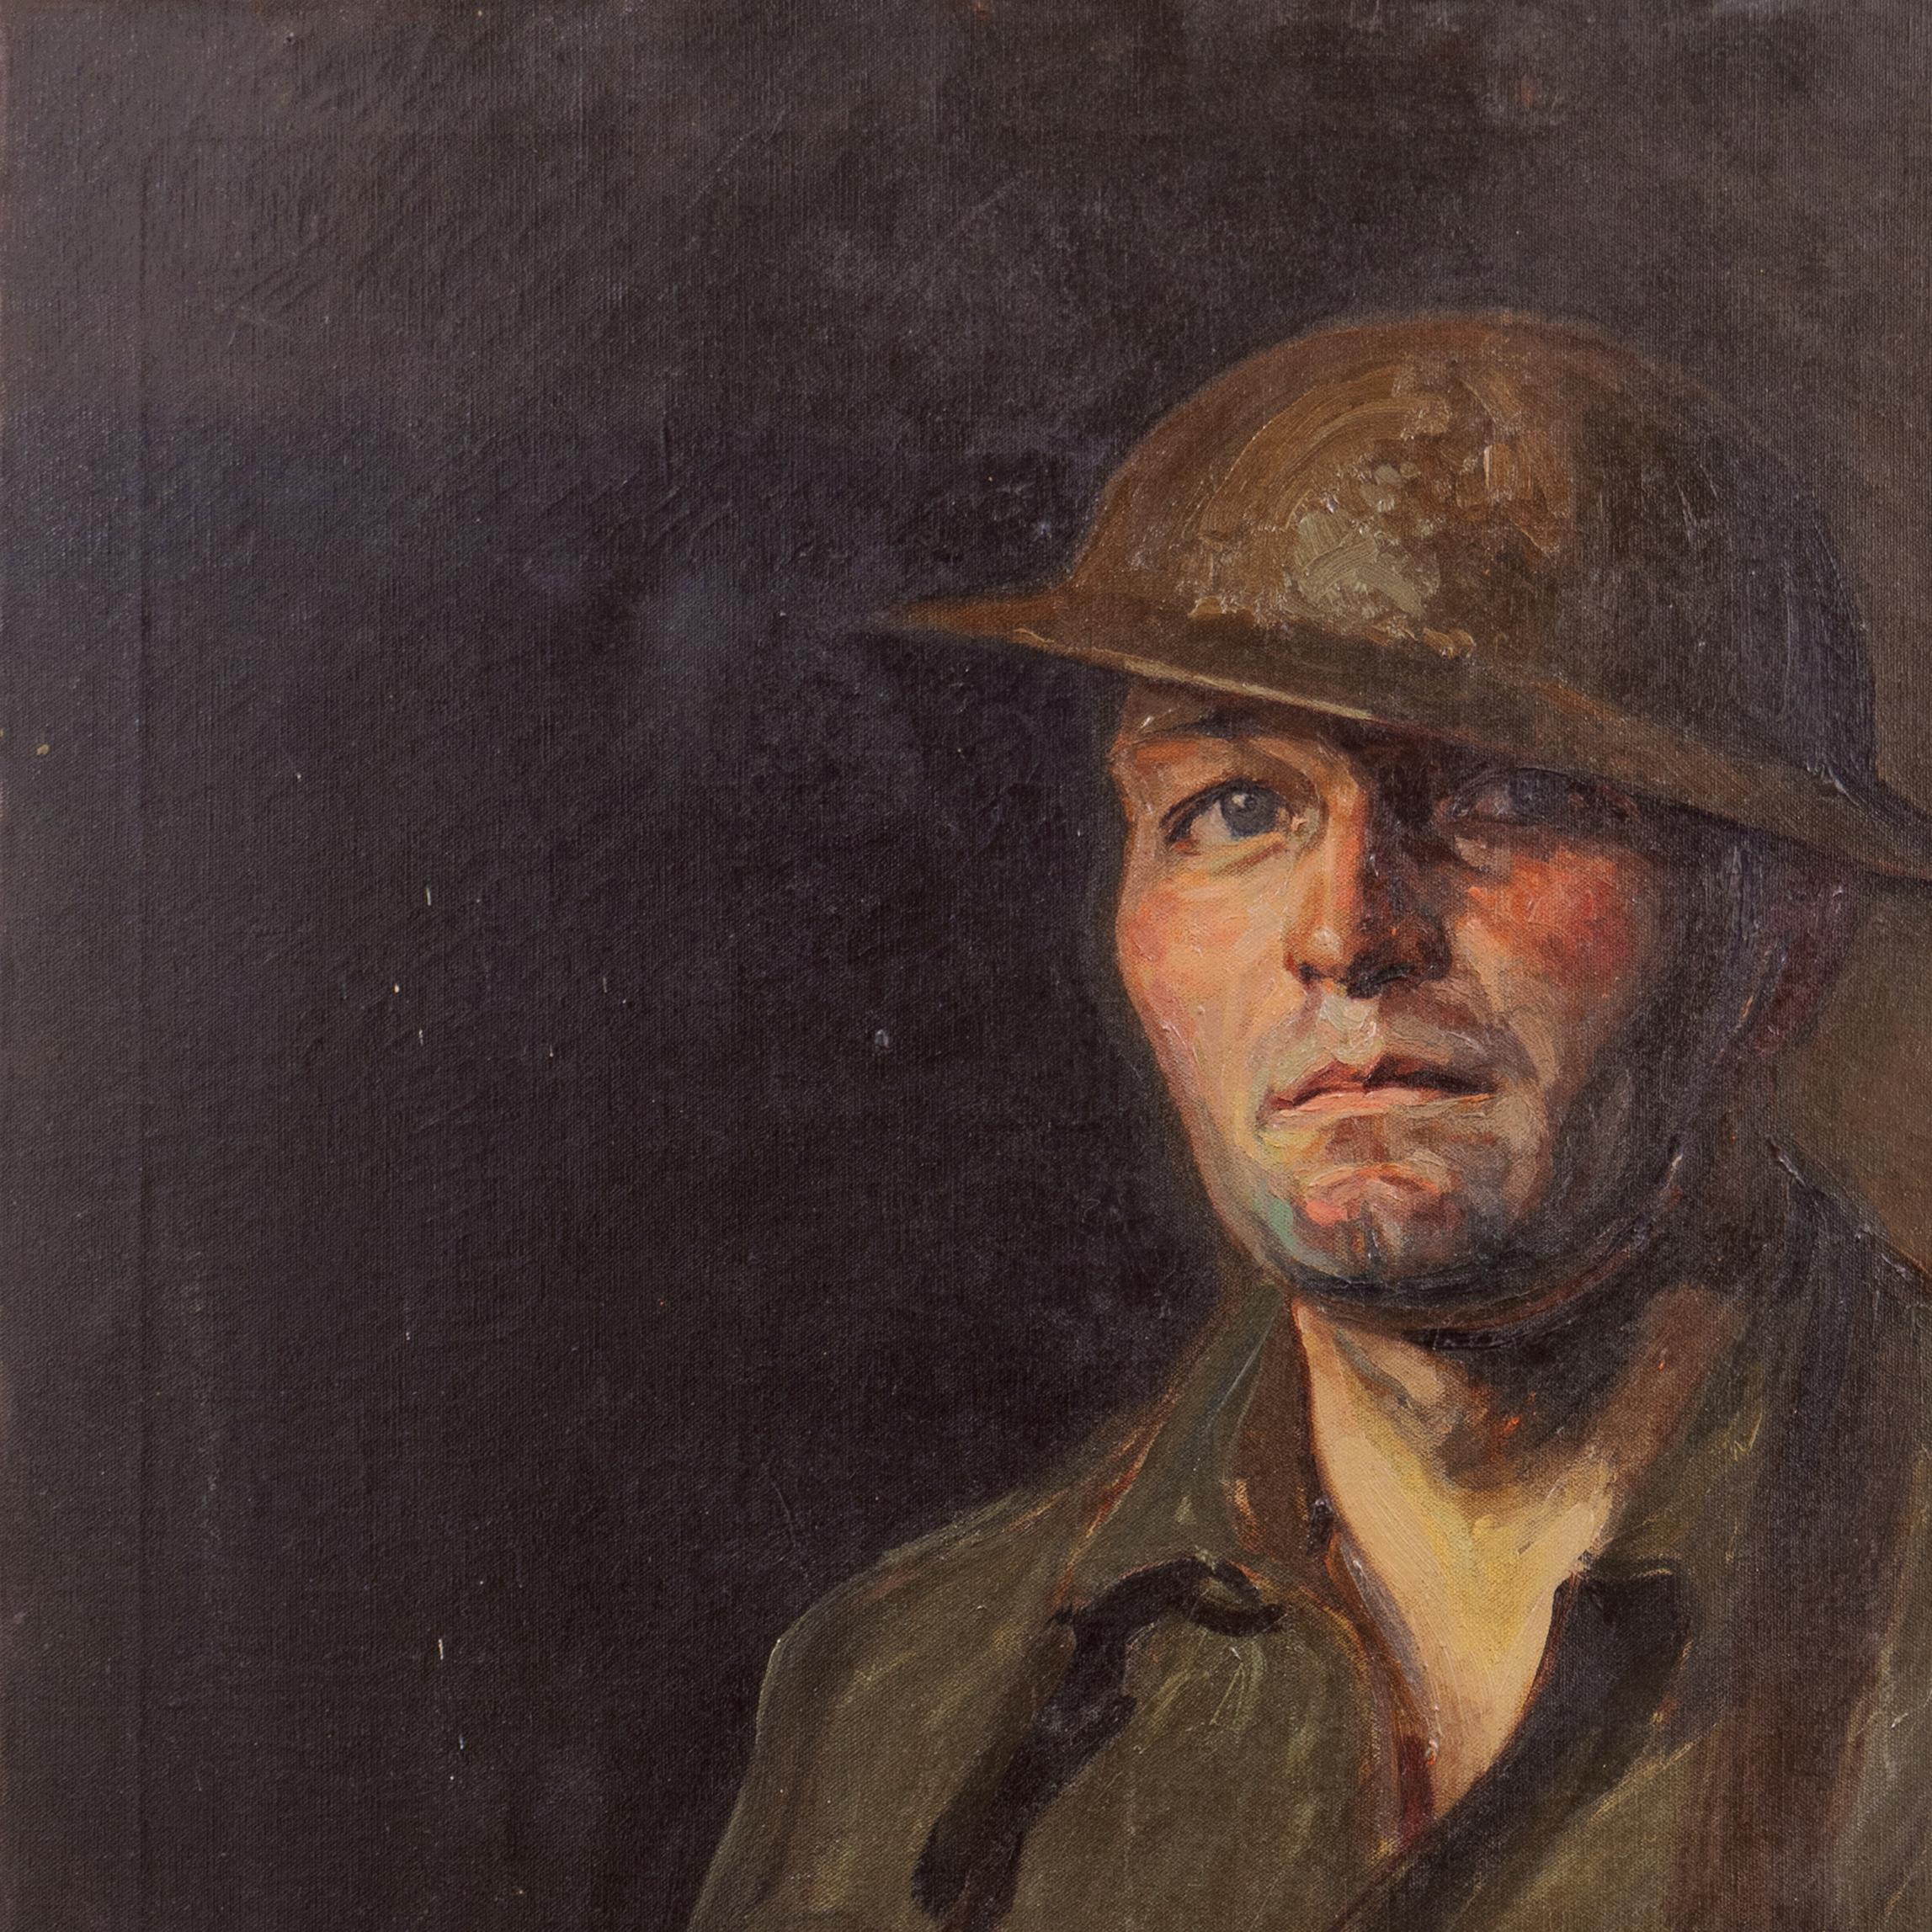 A substantial, English school portrait of a young World War One soldier painted circa 1915.

An exceptional figural work composed in a somber palette with intuitive brushwork. The unknown artist accomplishes a tour-de-force of portraiture and and